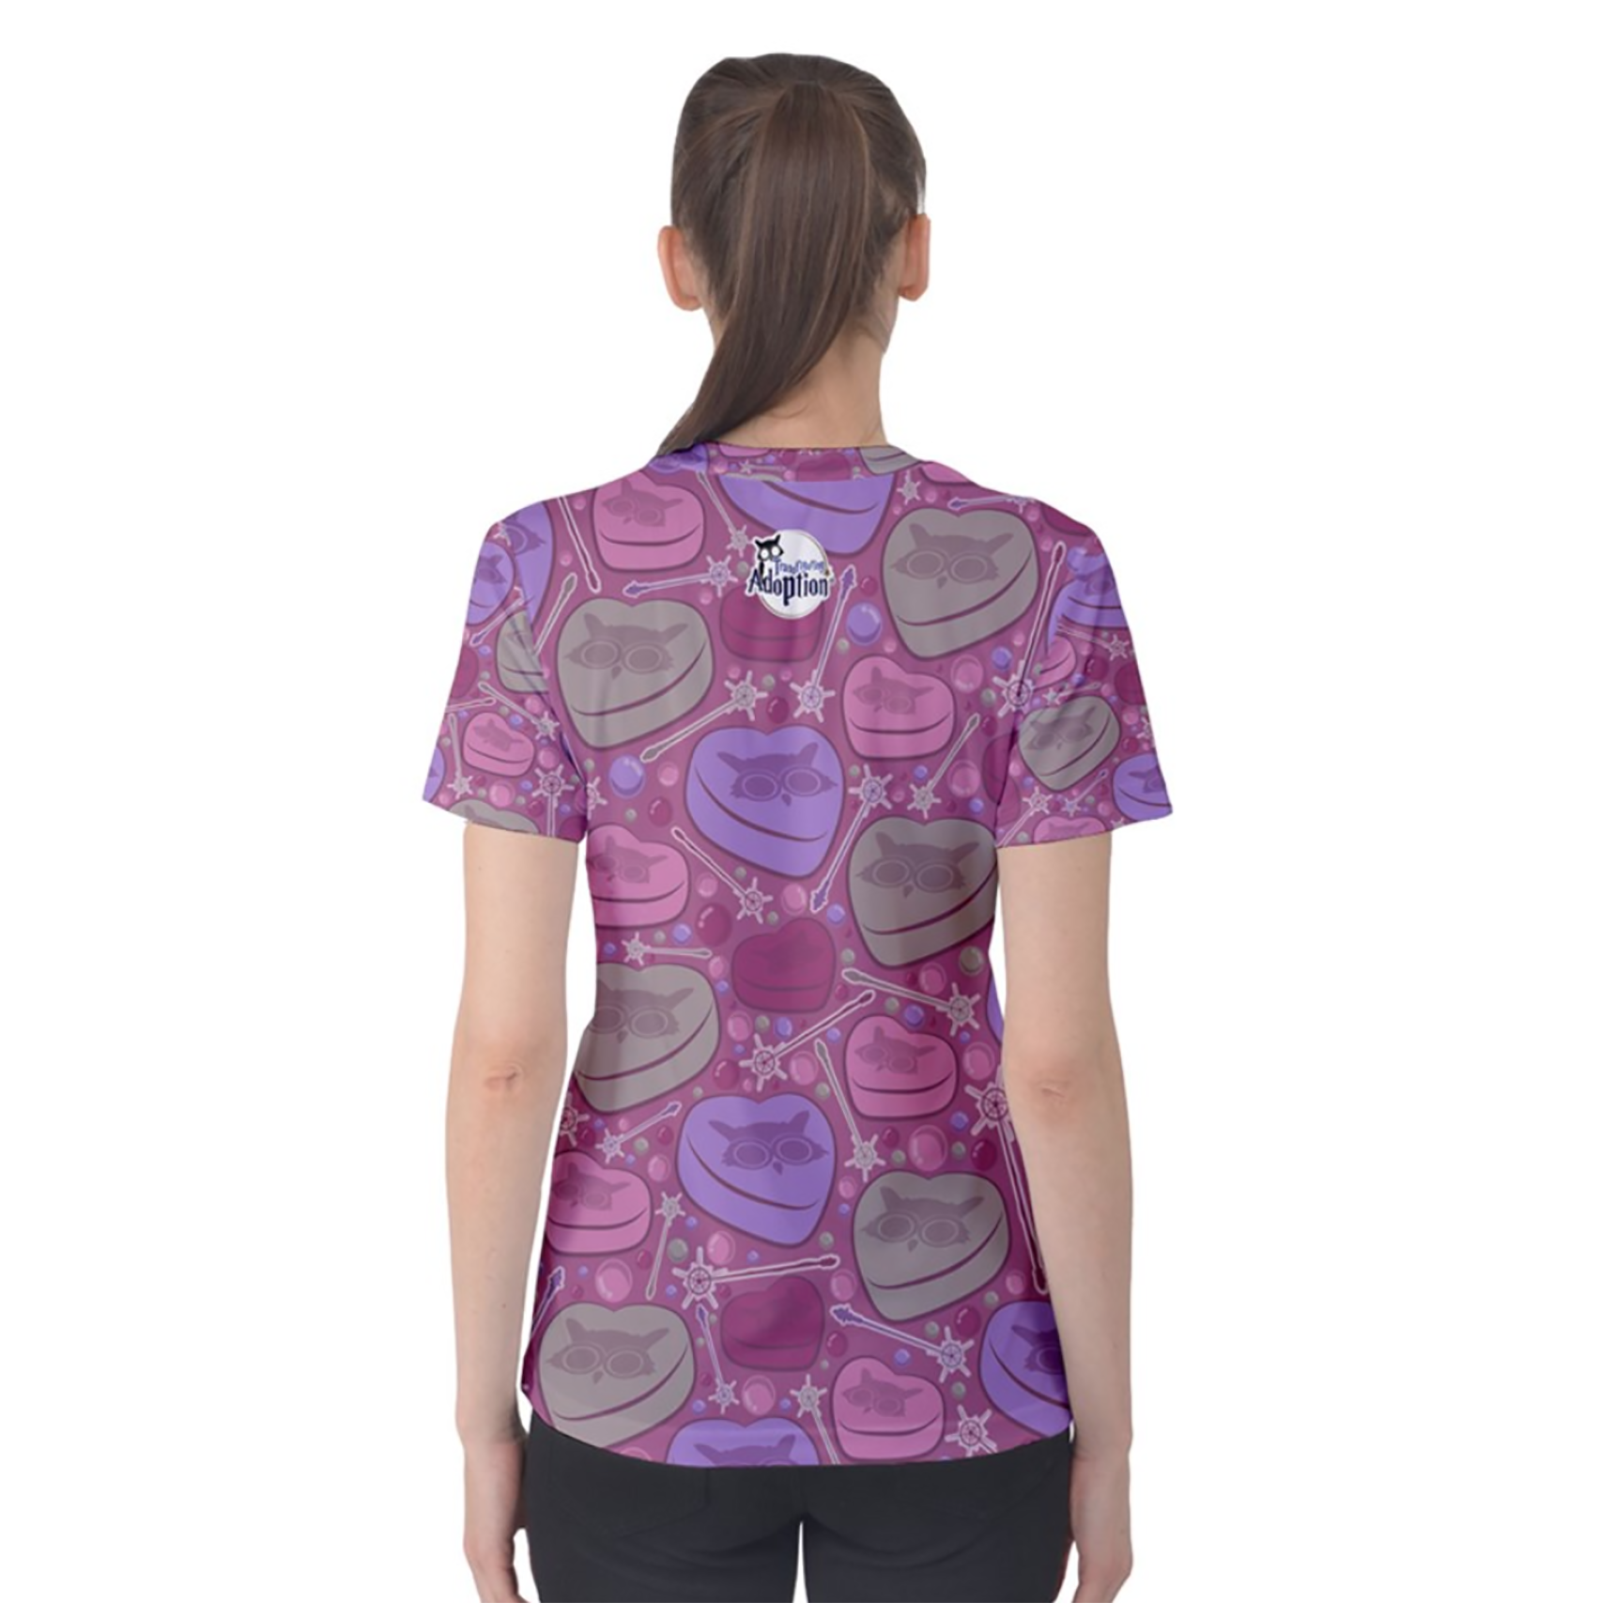 Charmed Women's Cotton Tee (Pink Patterned)